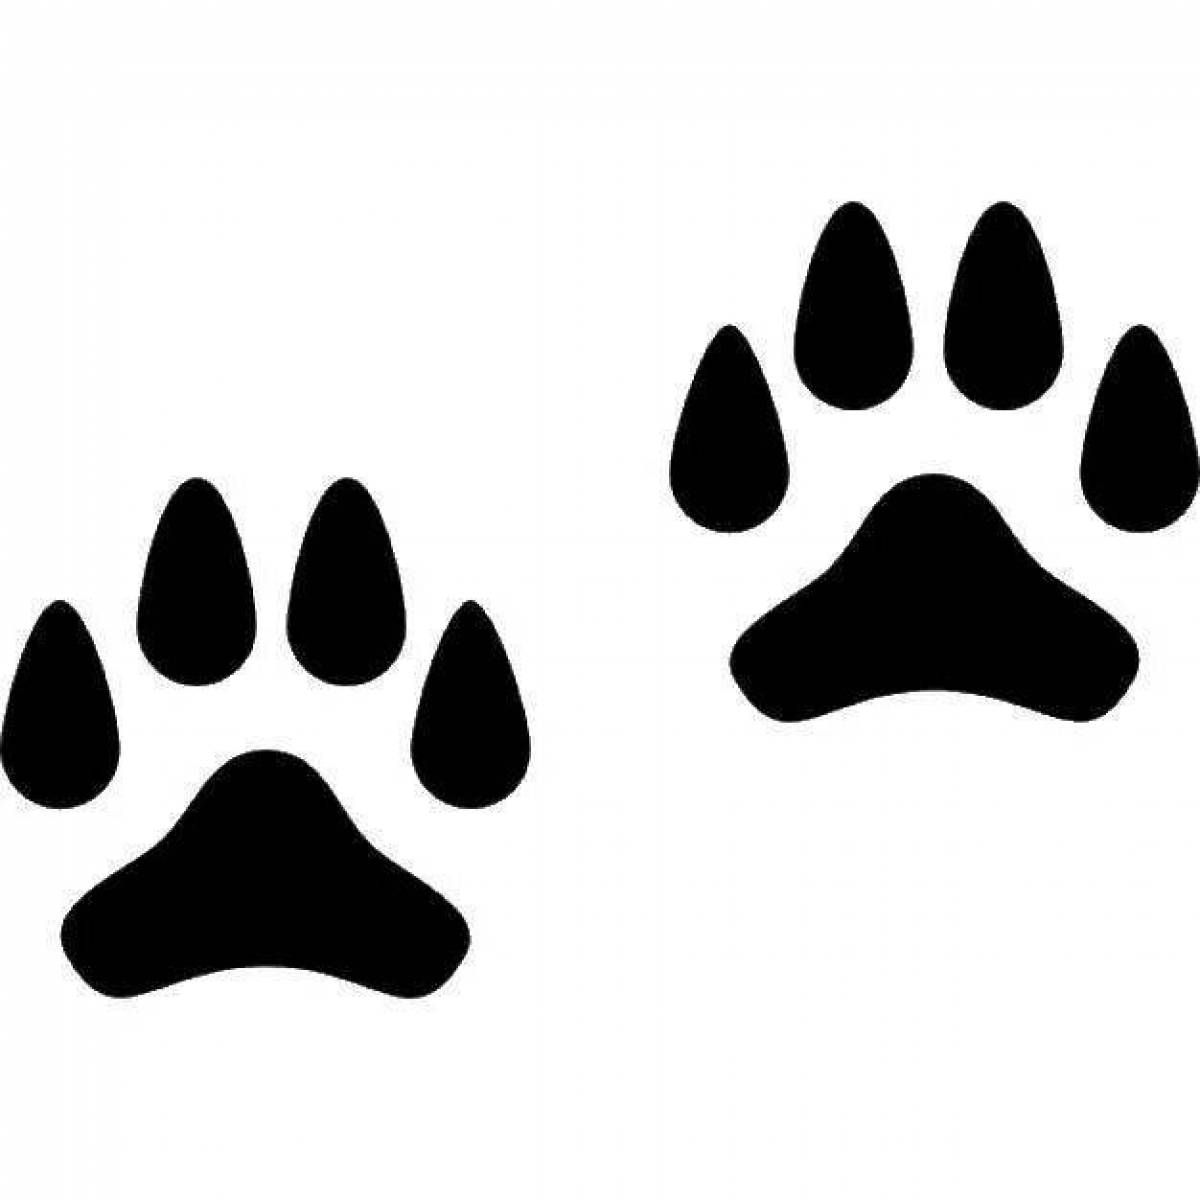 Coloring page of animal footprints